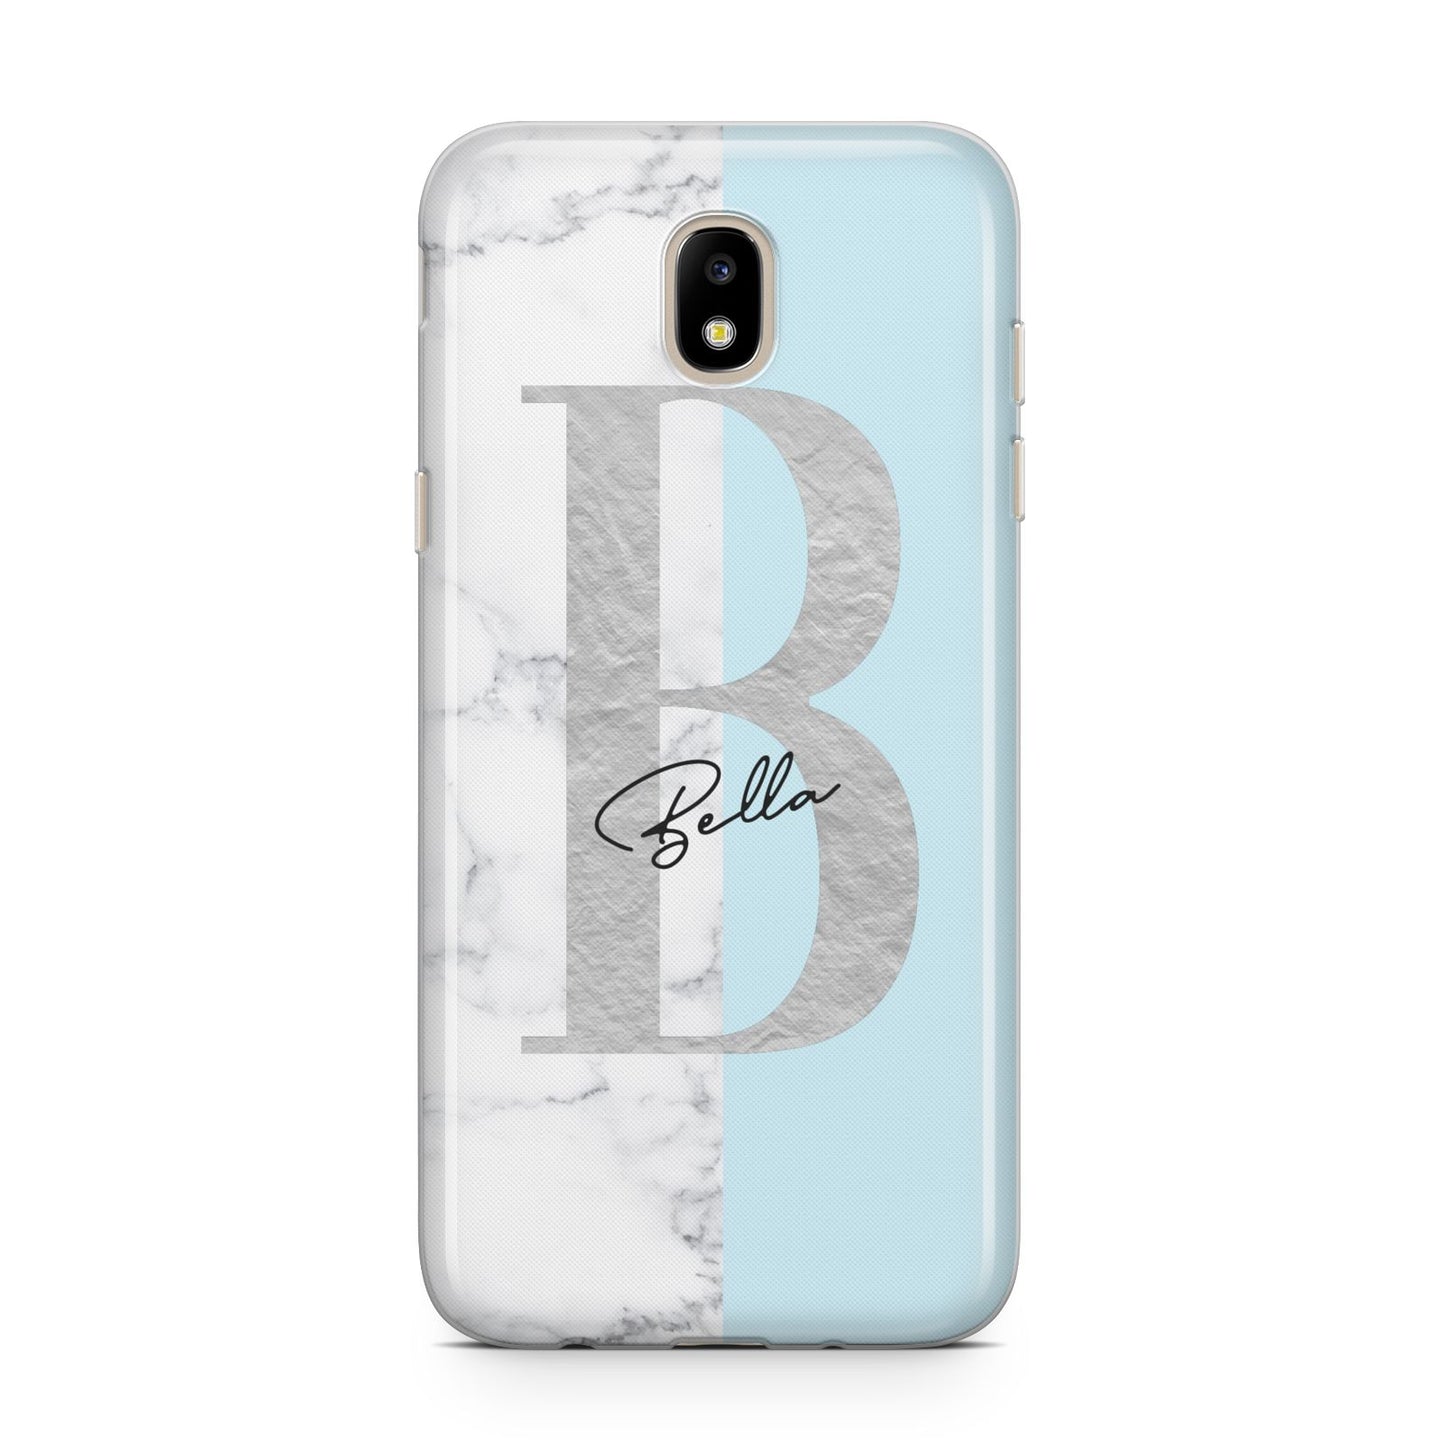 Personalised Chrome Marble Samsung J5 2017 Case